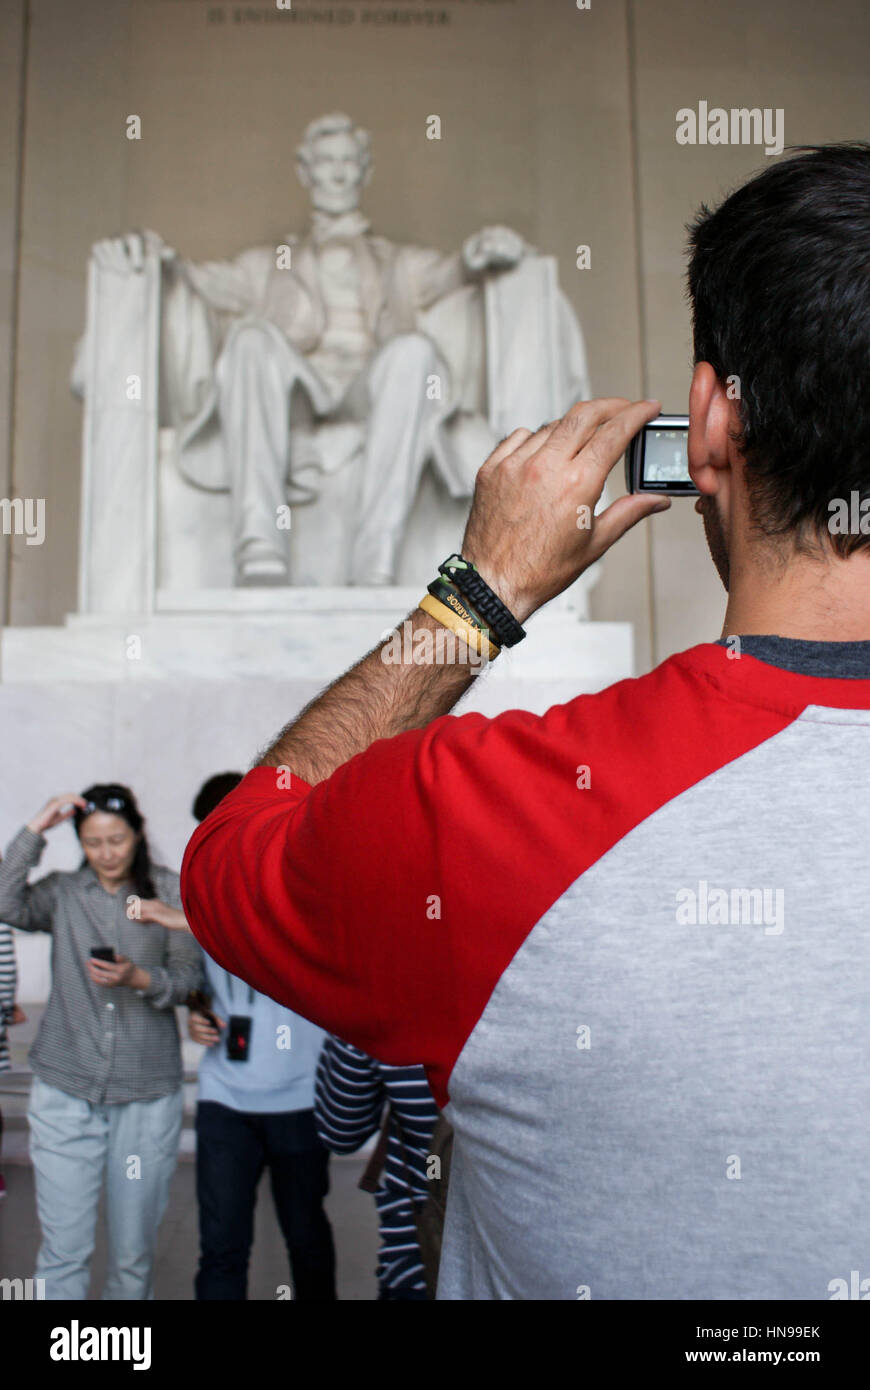 Washington DC, USA - September 27, 2014: Tourists take photos and pose in front of the Iconic Lincoln statue at Lincoln Memorial, Washington DC, USA Stock Photo